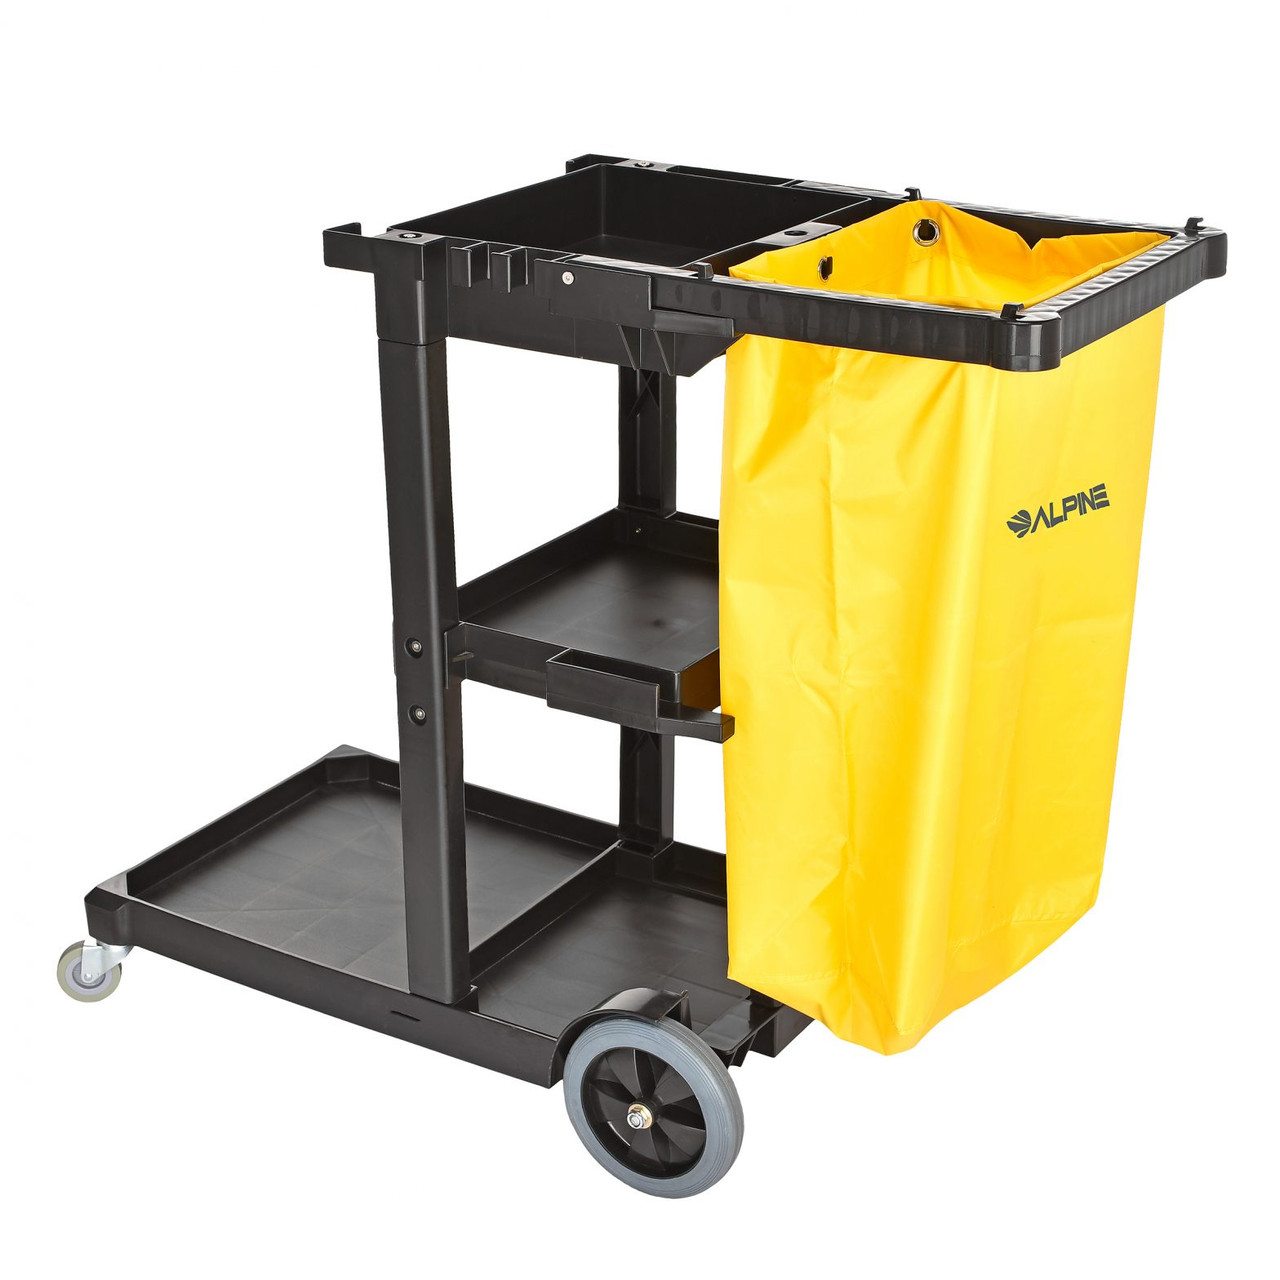 JANITORIAL CLEANING CART WITH 3 SHELVES - Cleaner Solutions